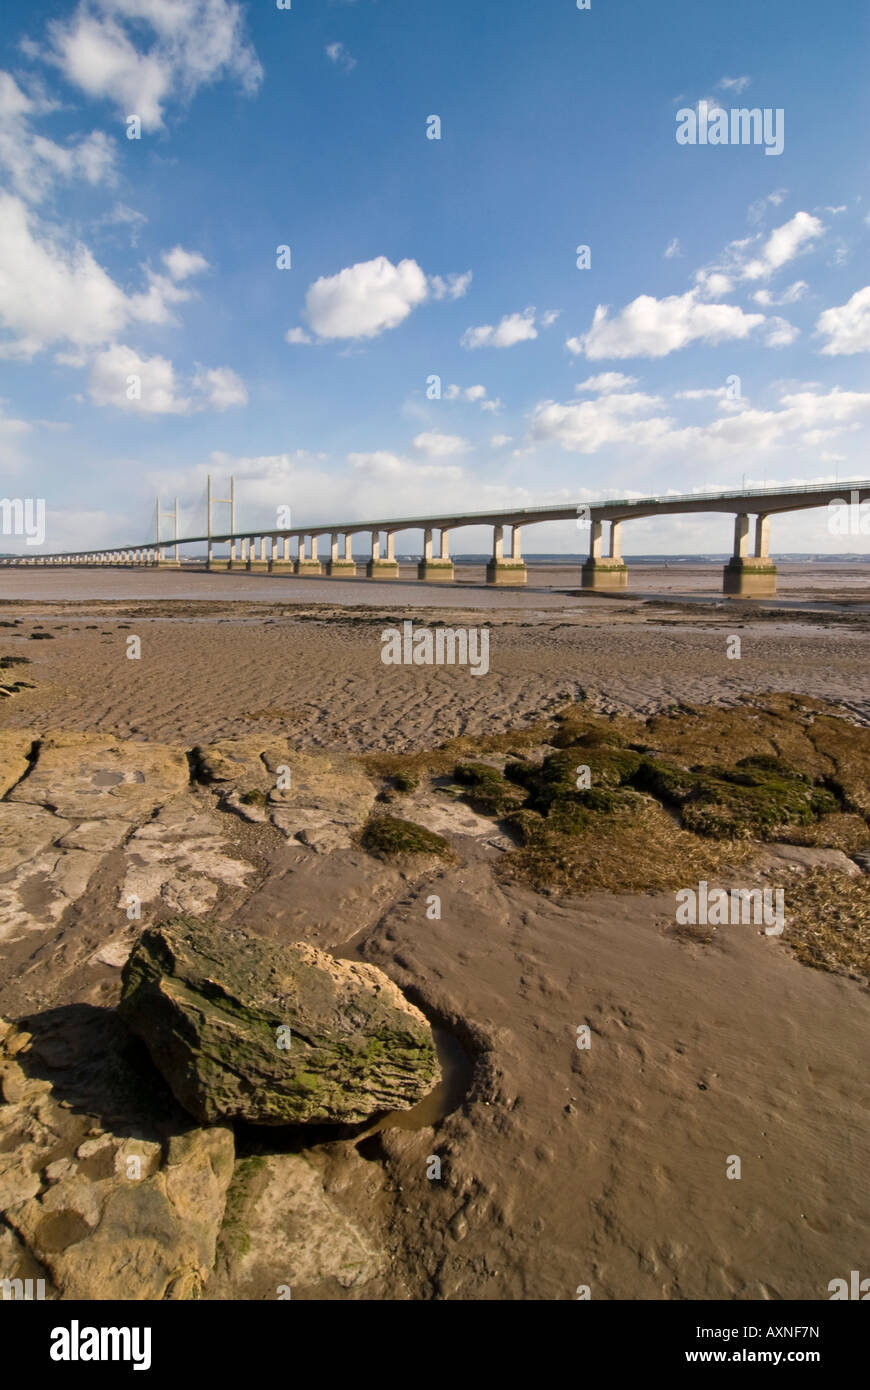 Vertical wide angle of the Second Severn Bridge [ail groesfan hafren] crossing the Severn estuary on a bright sunny day Stock Photo